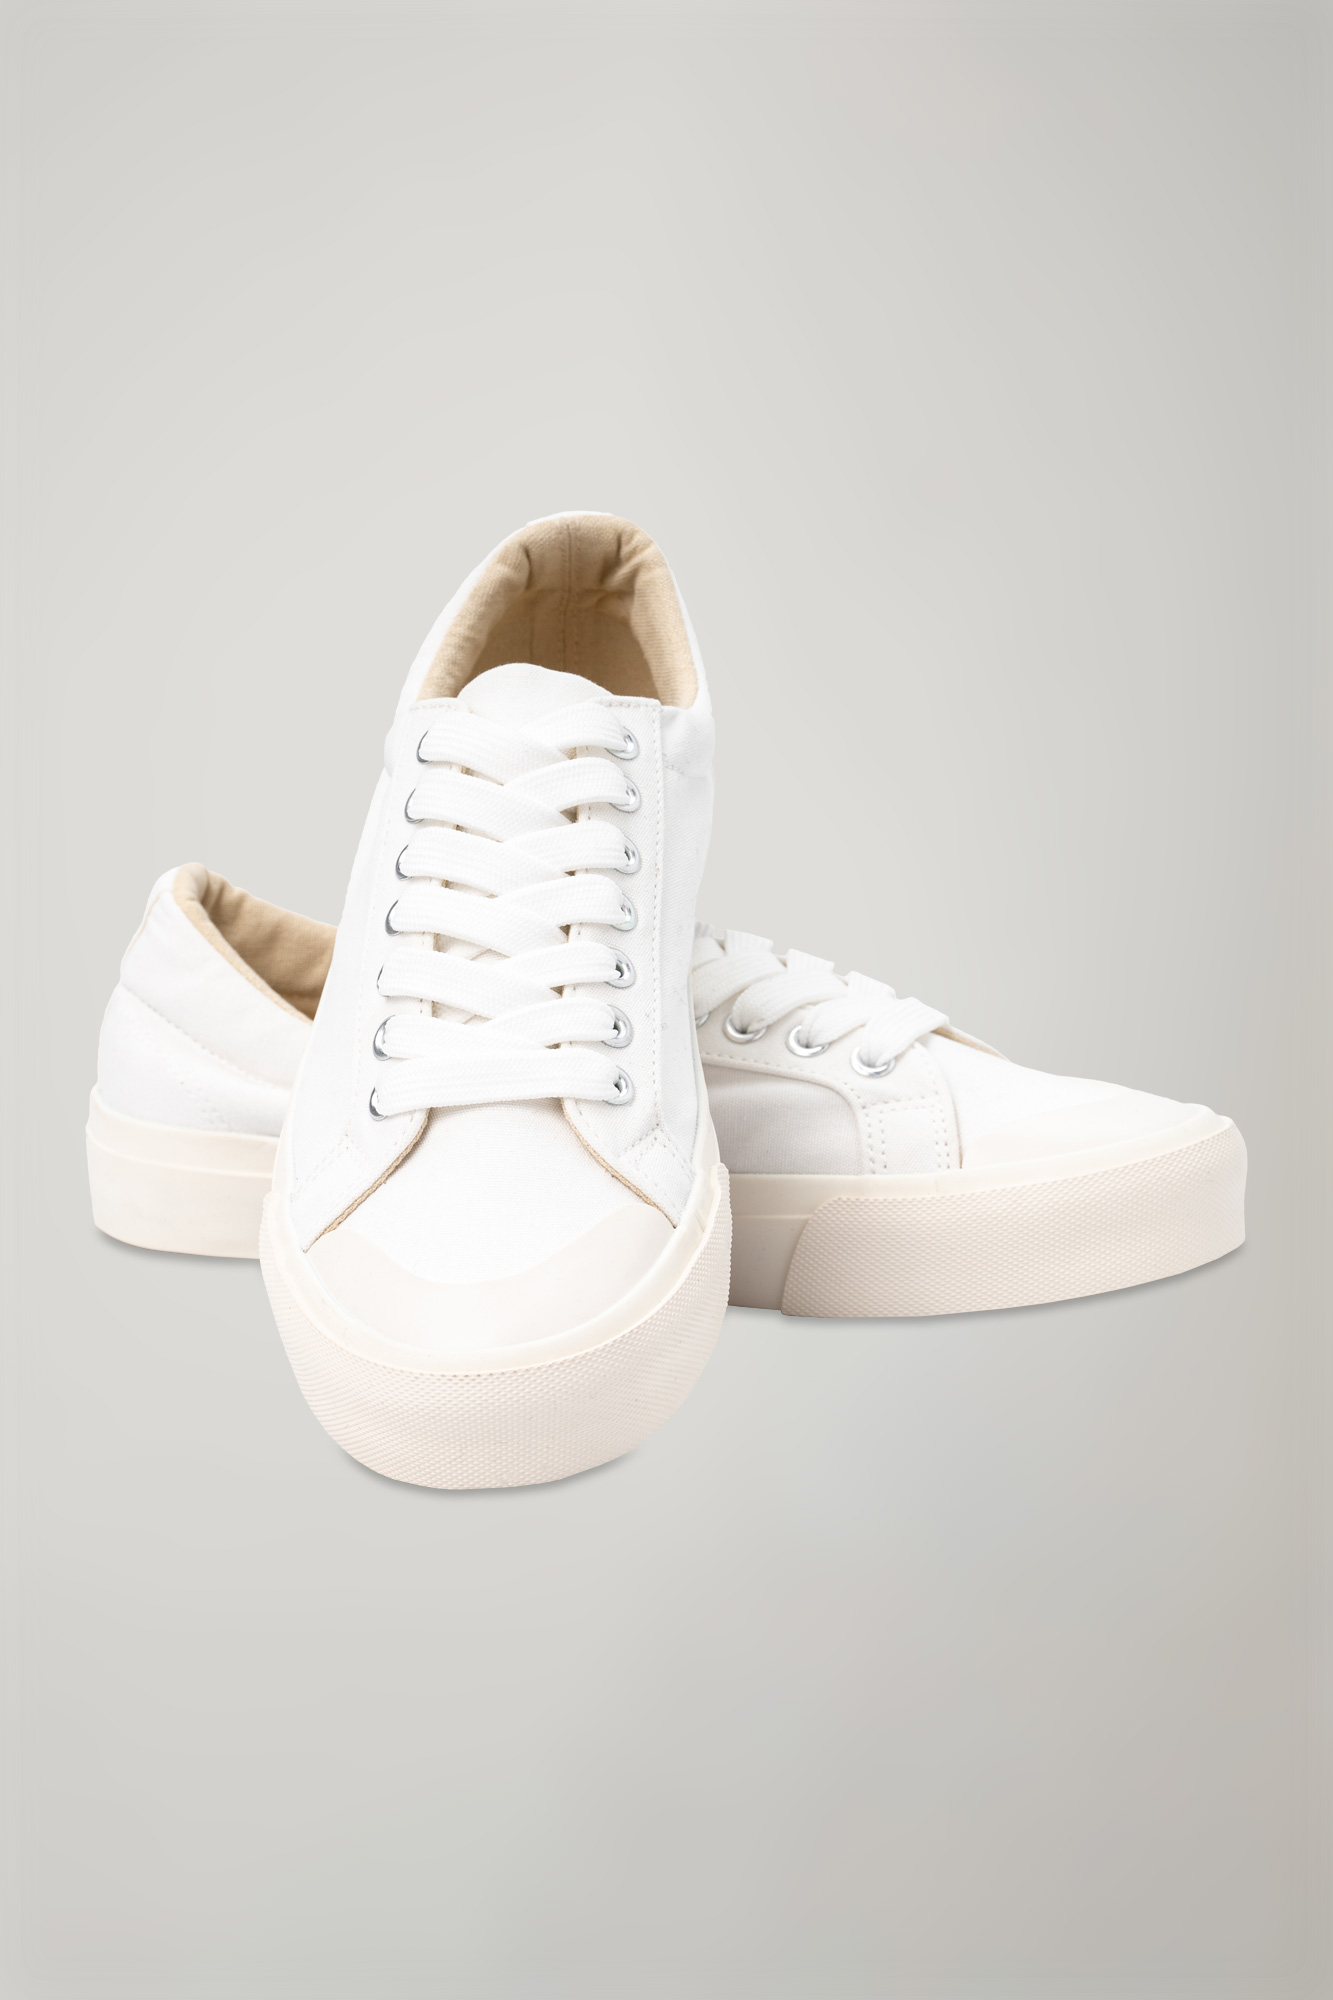 Unisex Sneakers image number null